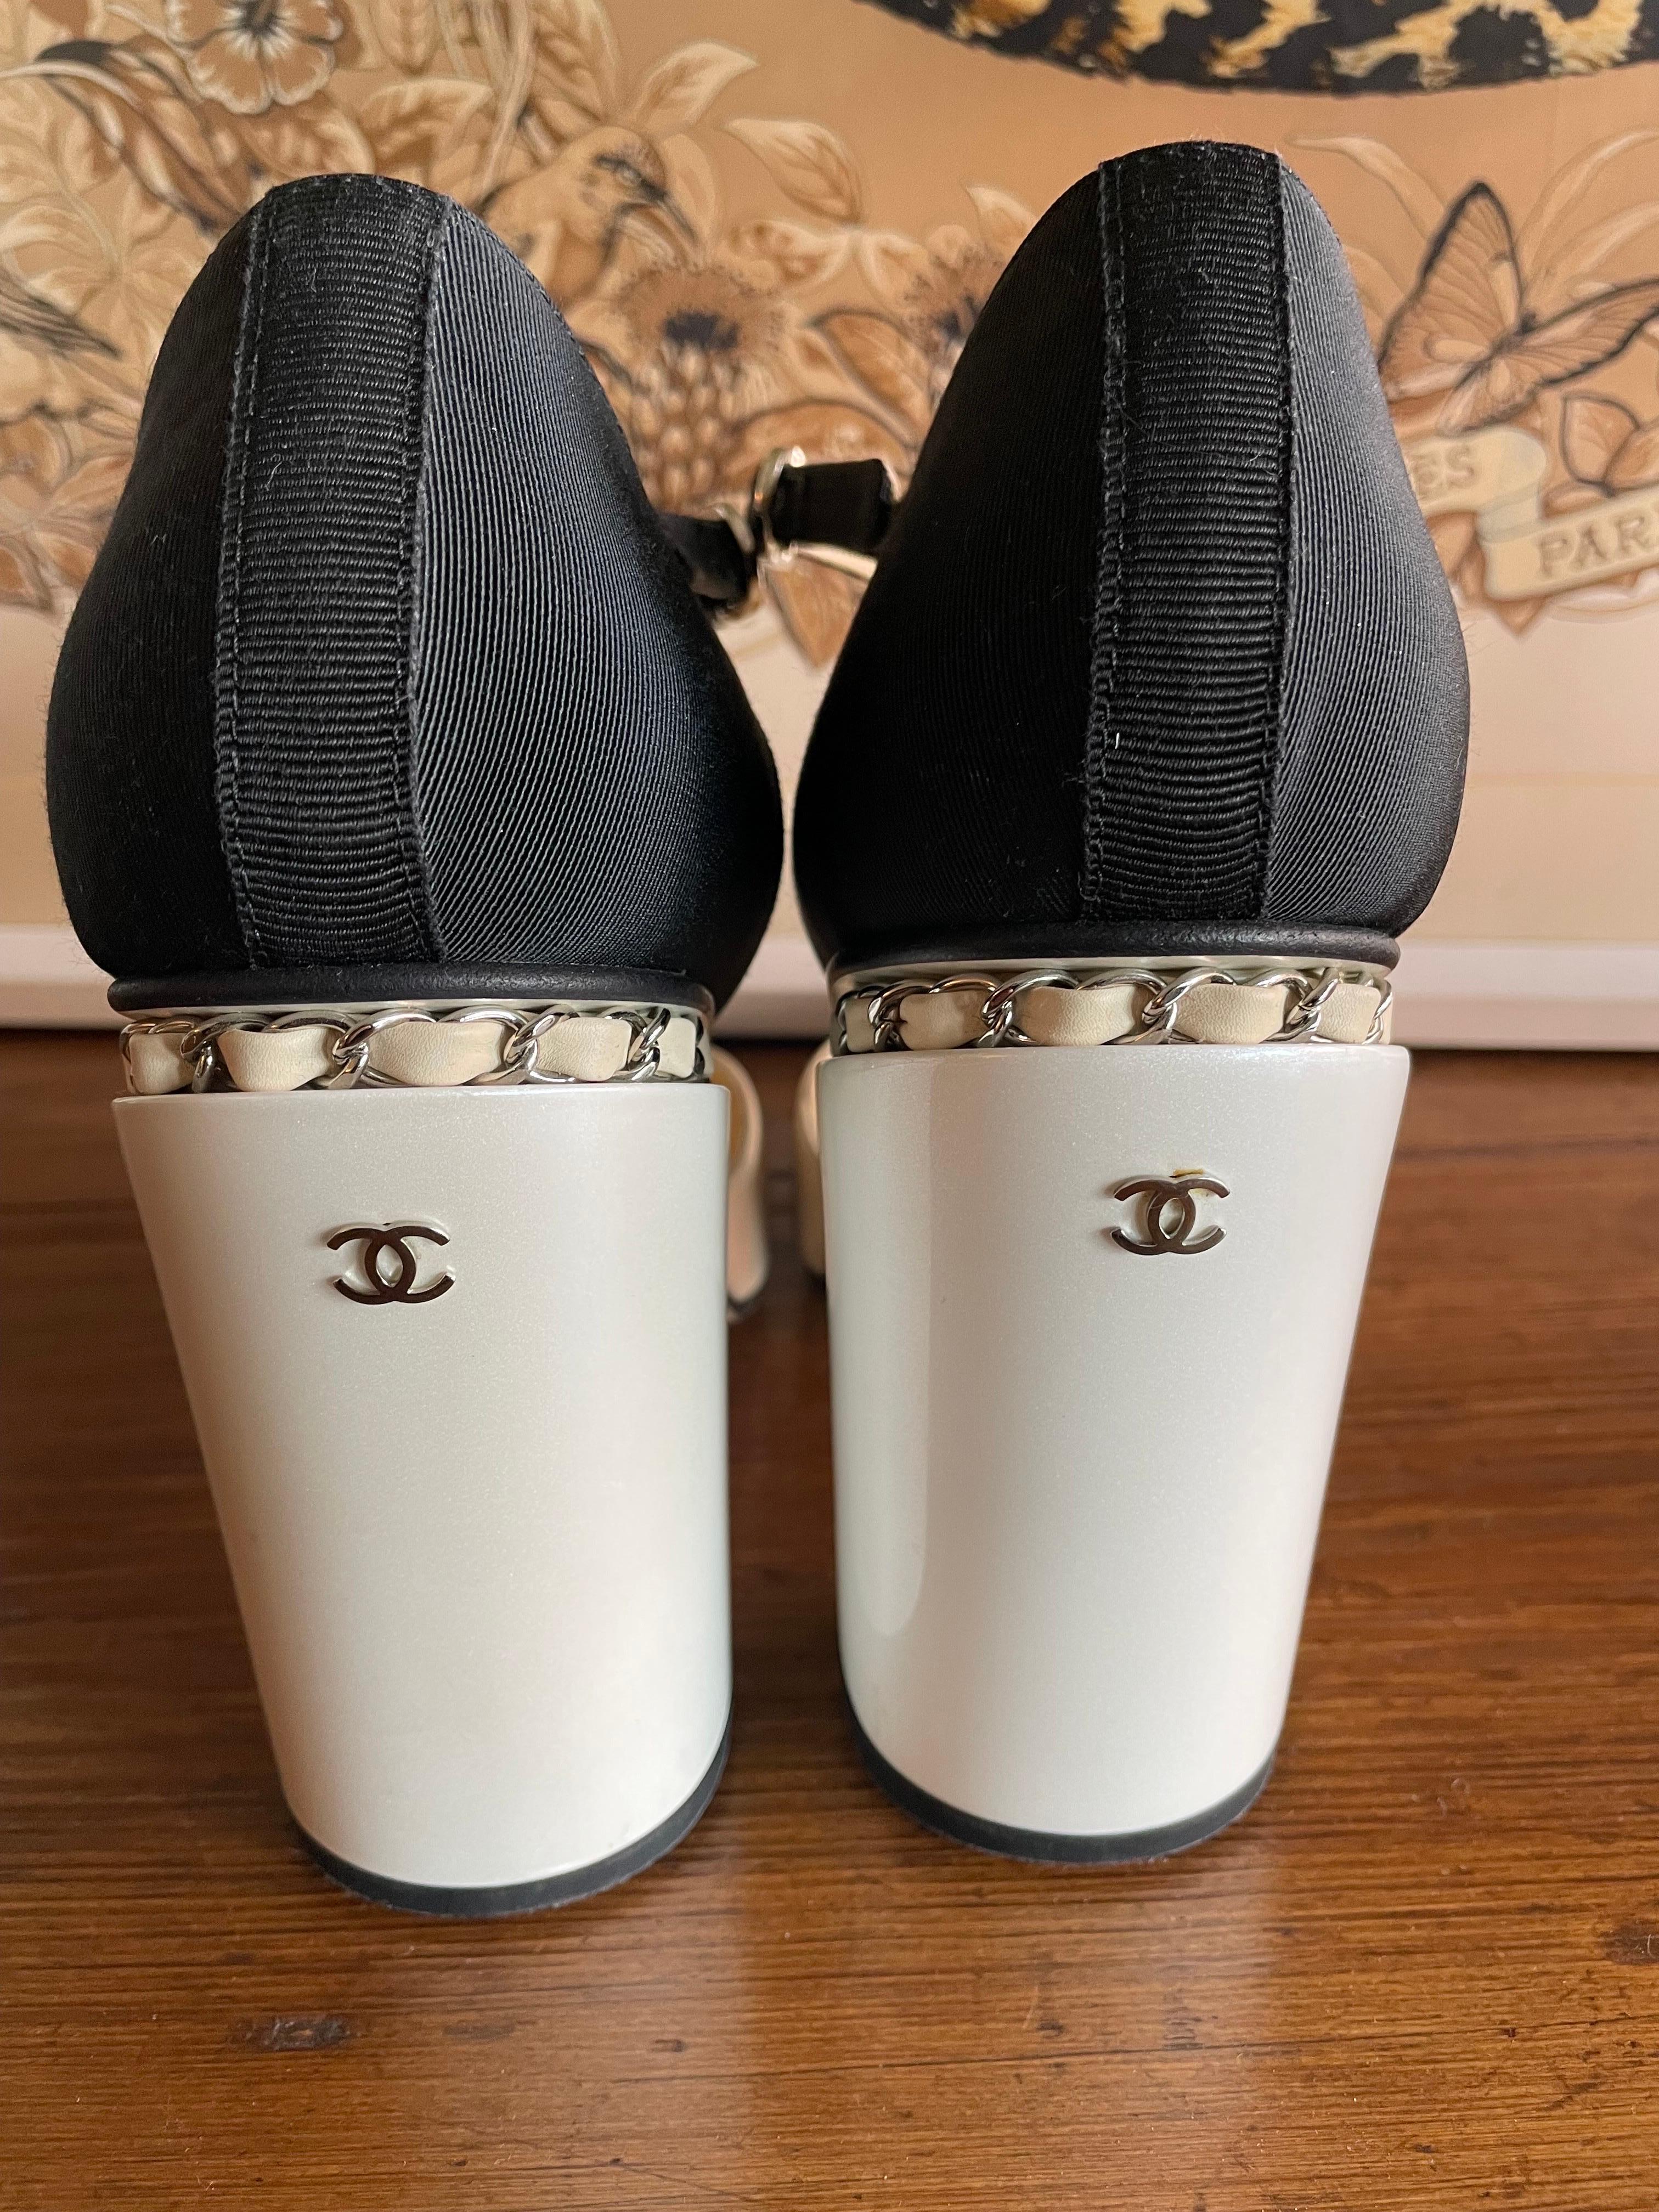 Chanel Mary Jane leather shoes. 1